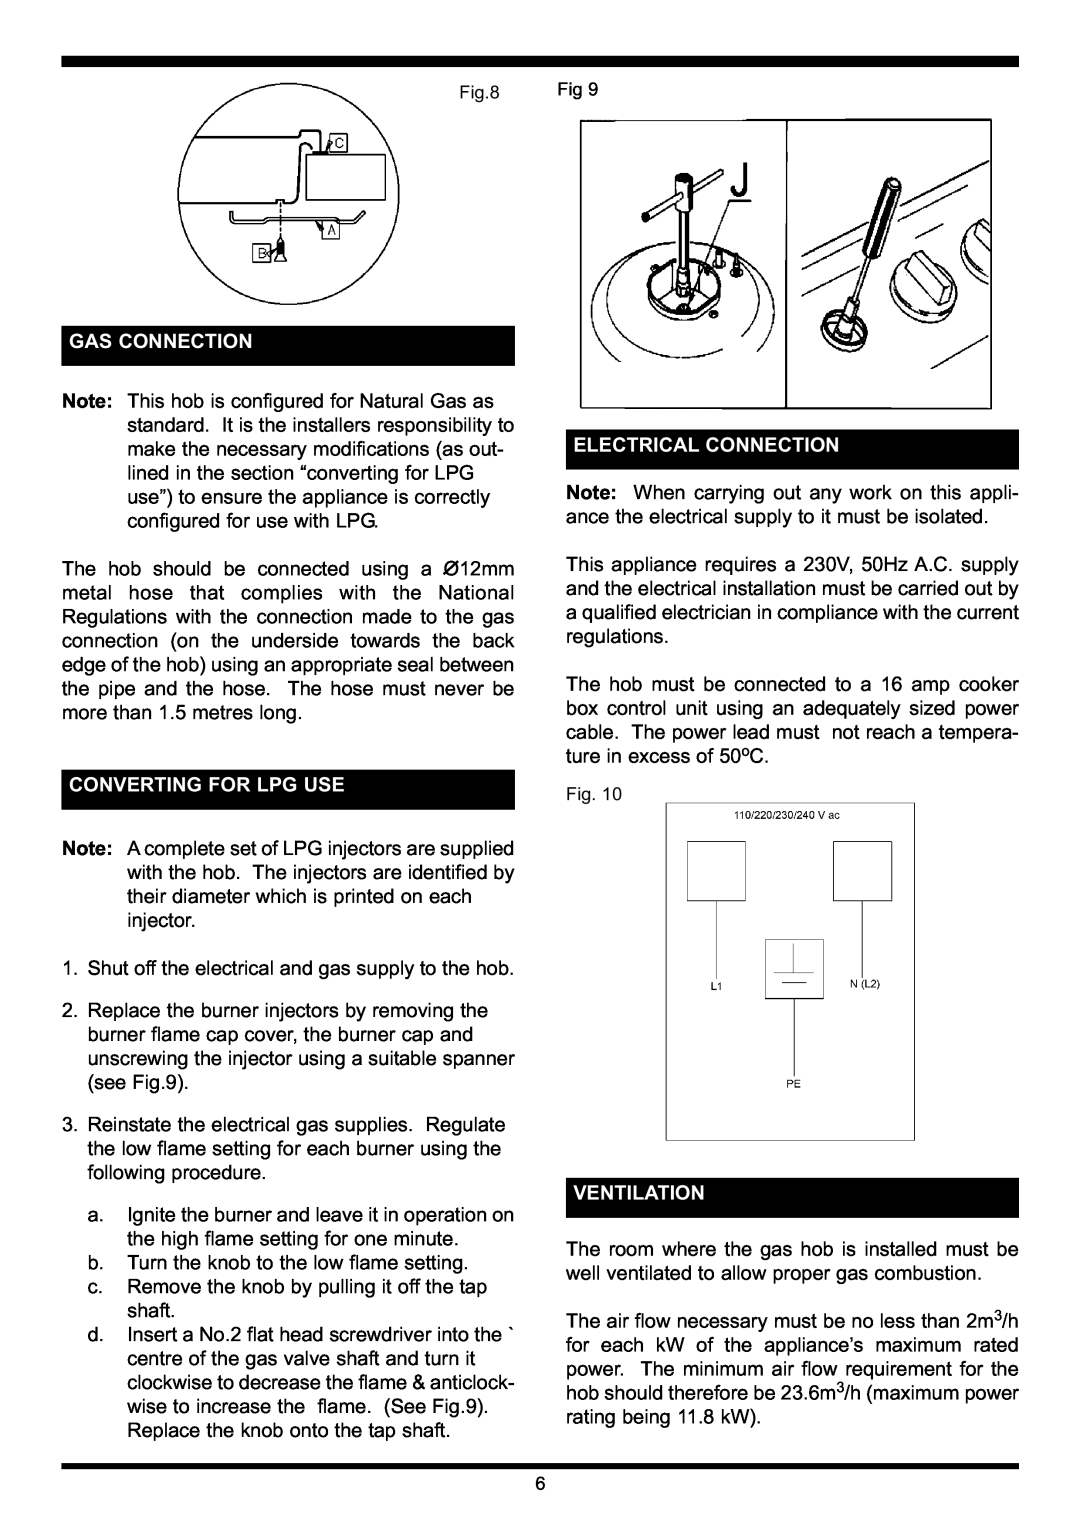 Waterford Precision Cycles Gas Hob manual Gas Connection, Converting For Lpg Use, Electrical Connection, Ventilation 